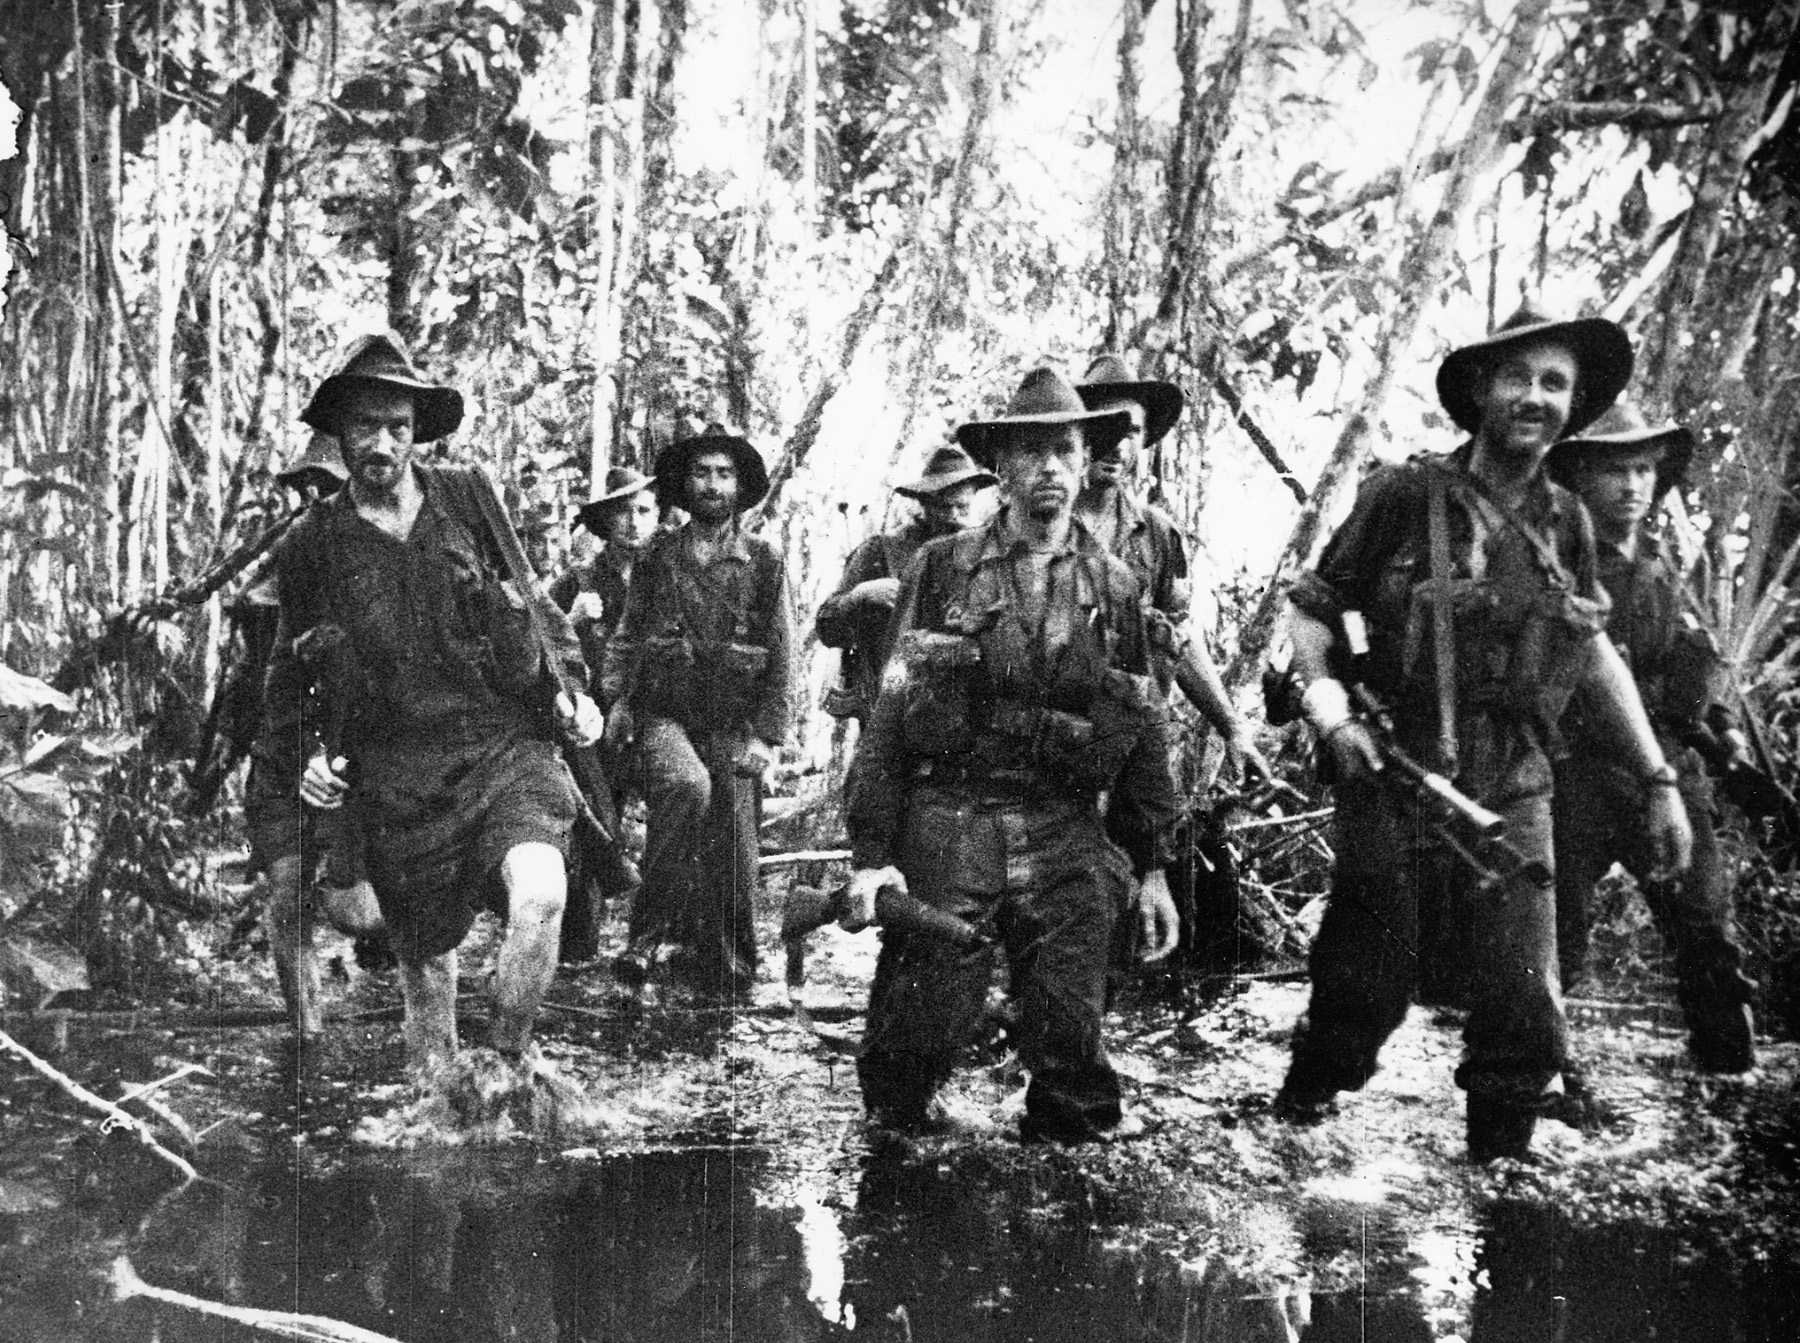 Australian troops slosh through knee-deep water in the jungles of Buna. The stifling heat and swampy, insect-infested terrain took a harsh toll on the morale of many.